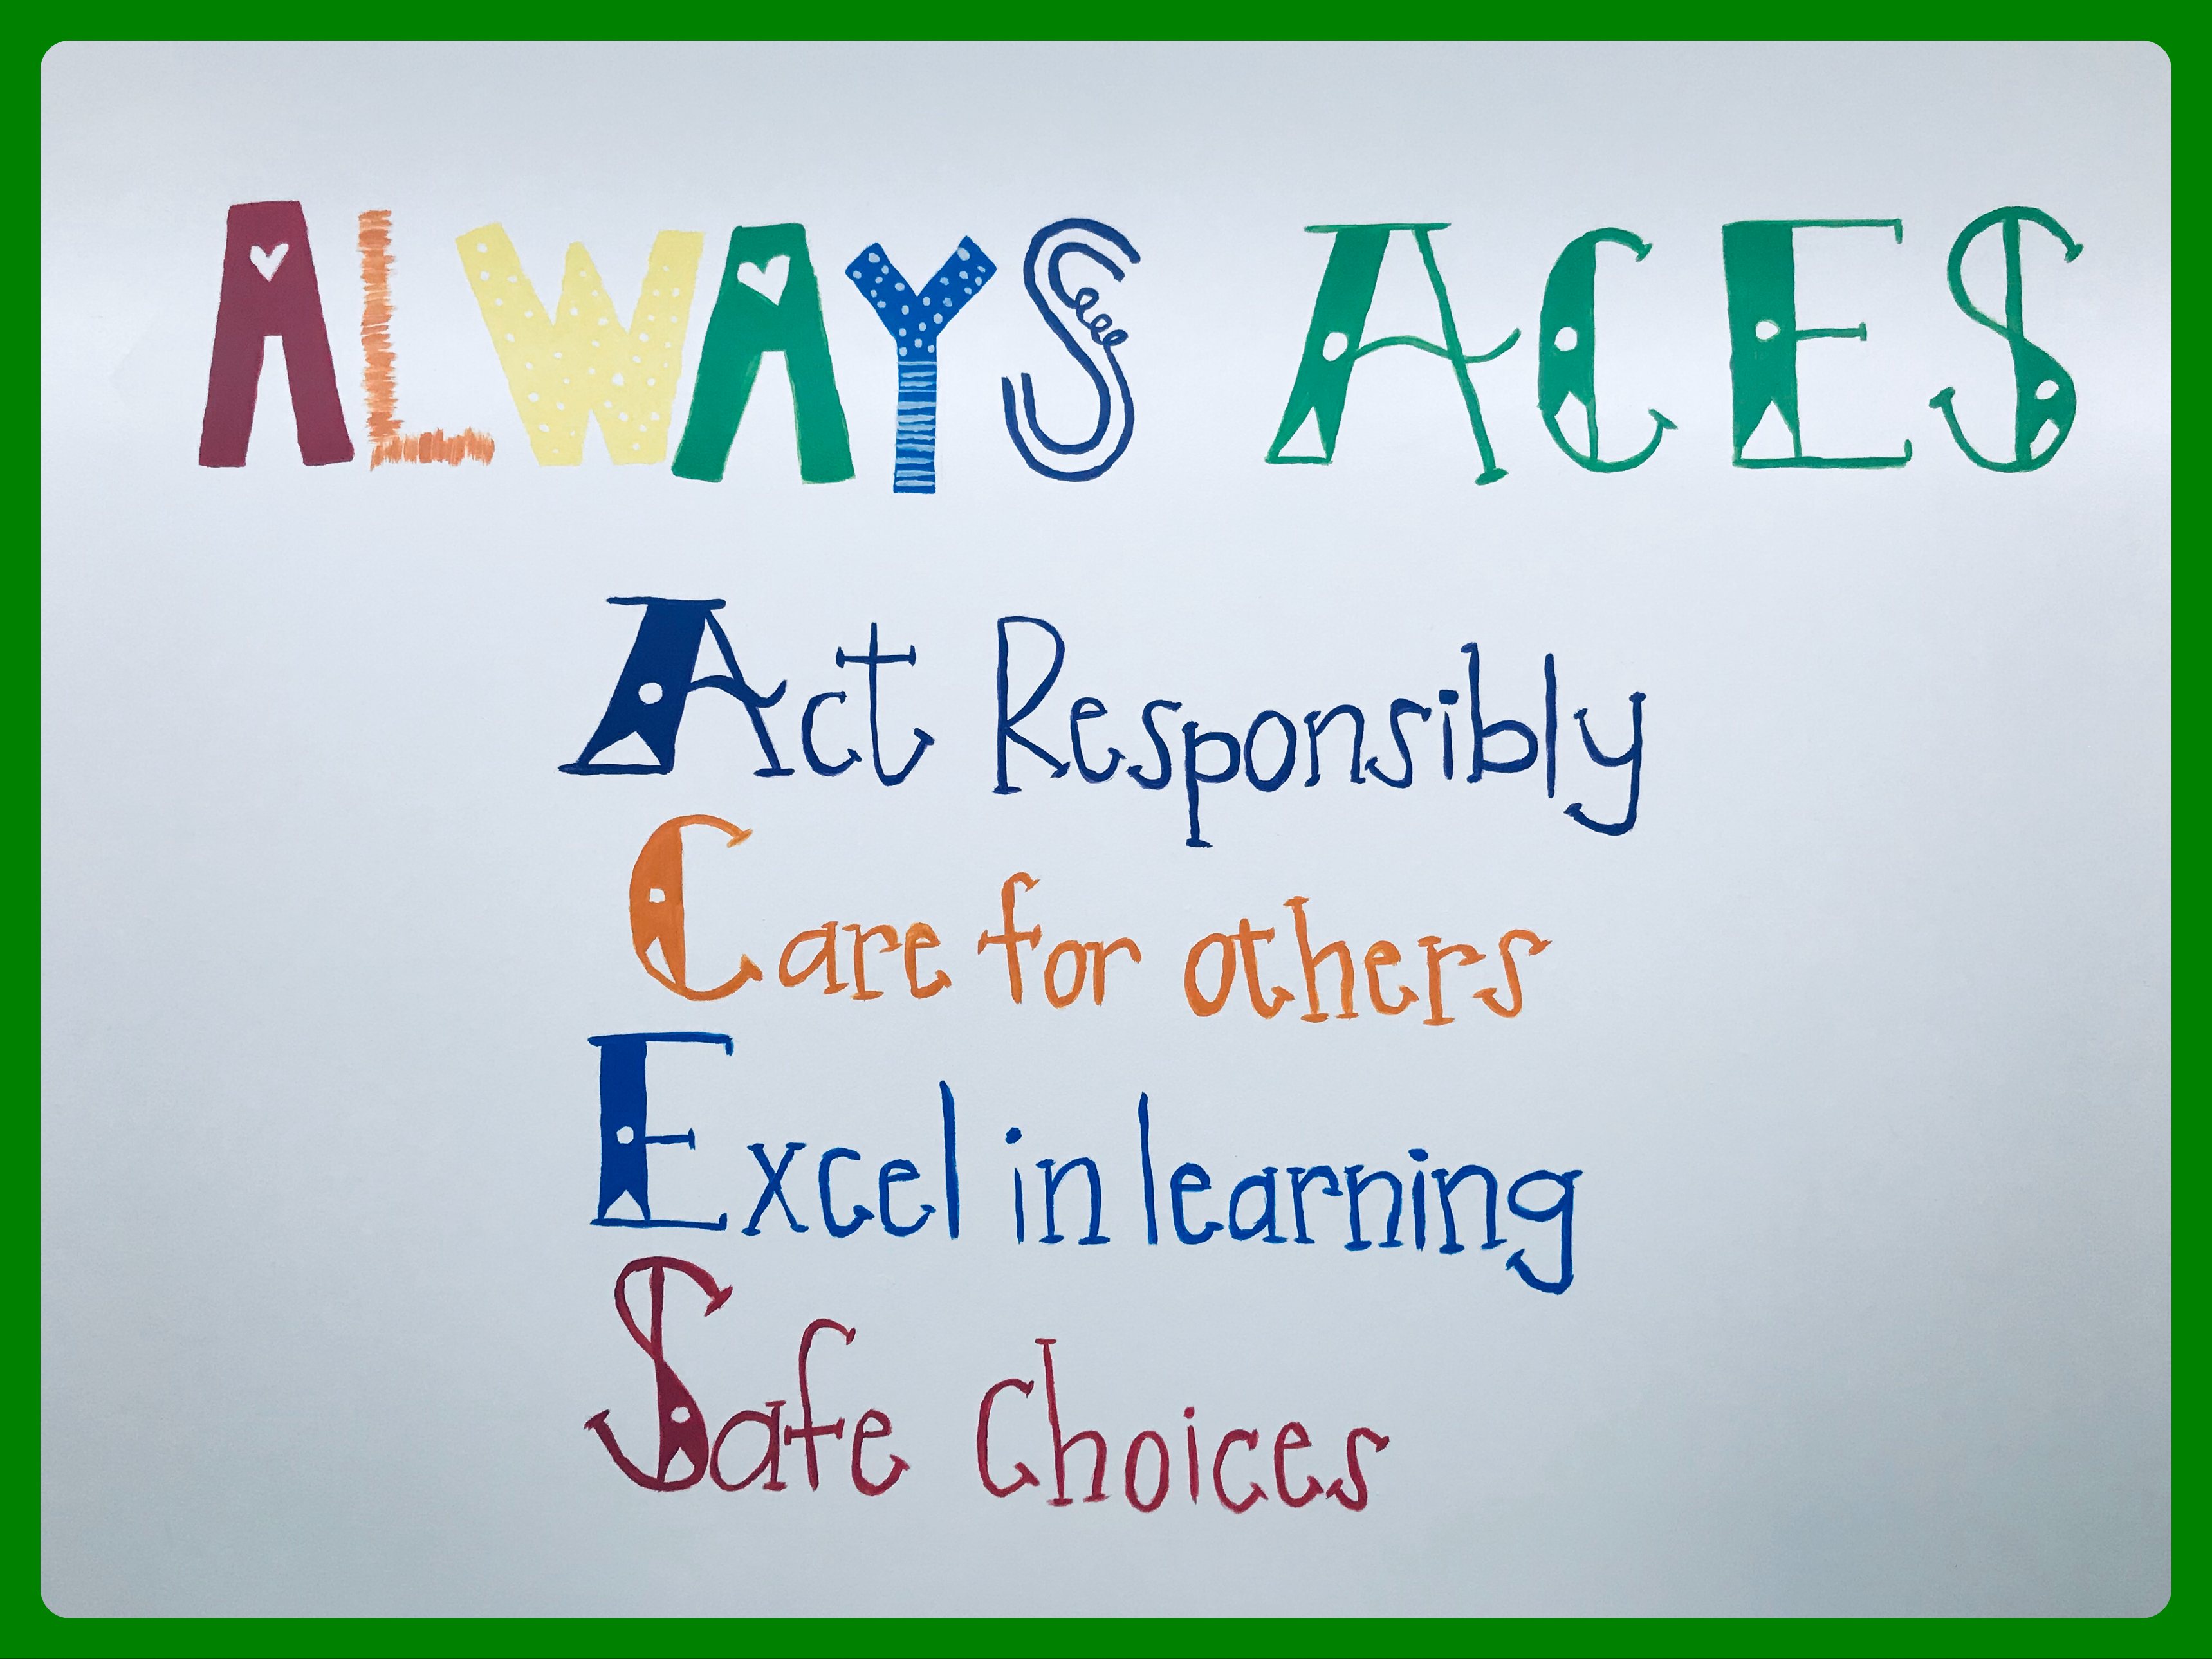 Always Aces:  Act Responsibly, Care for others, Excel in learning, Safe choices